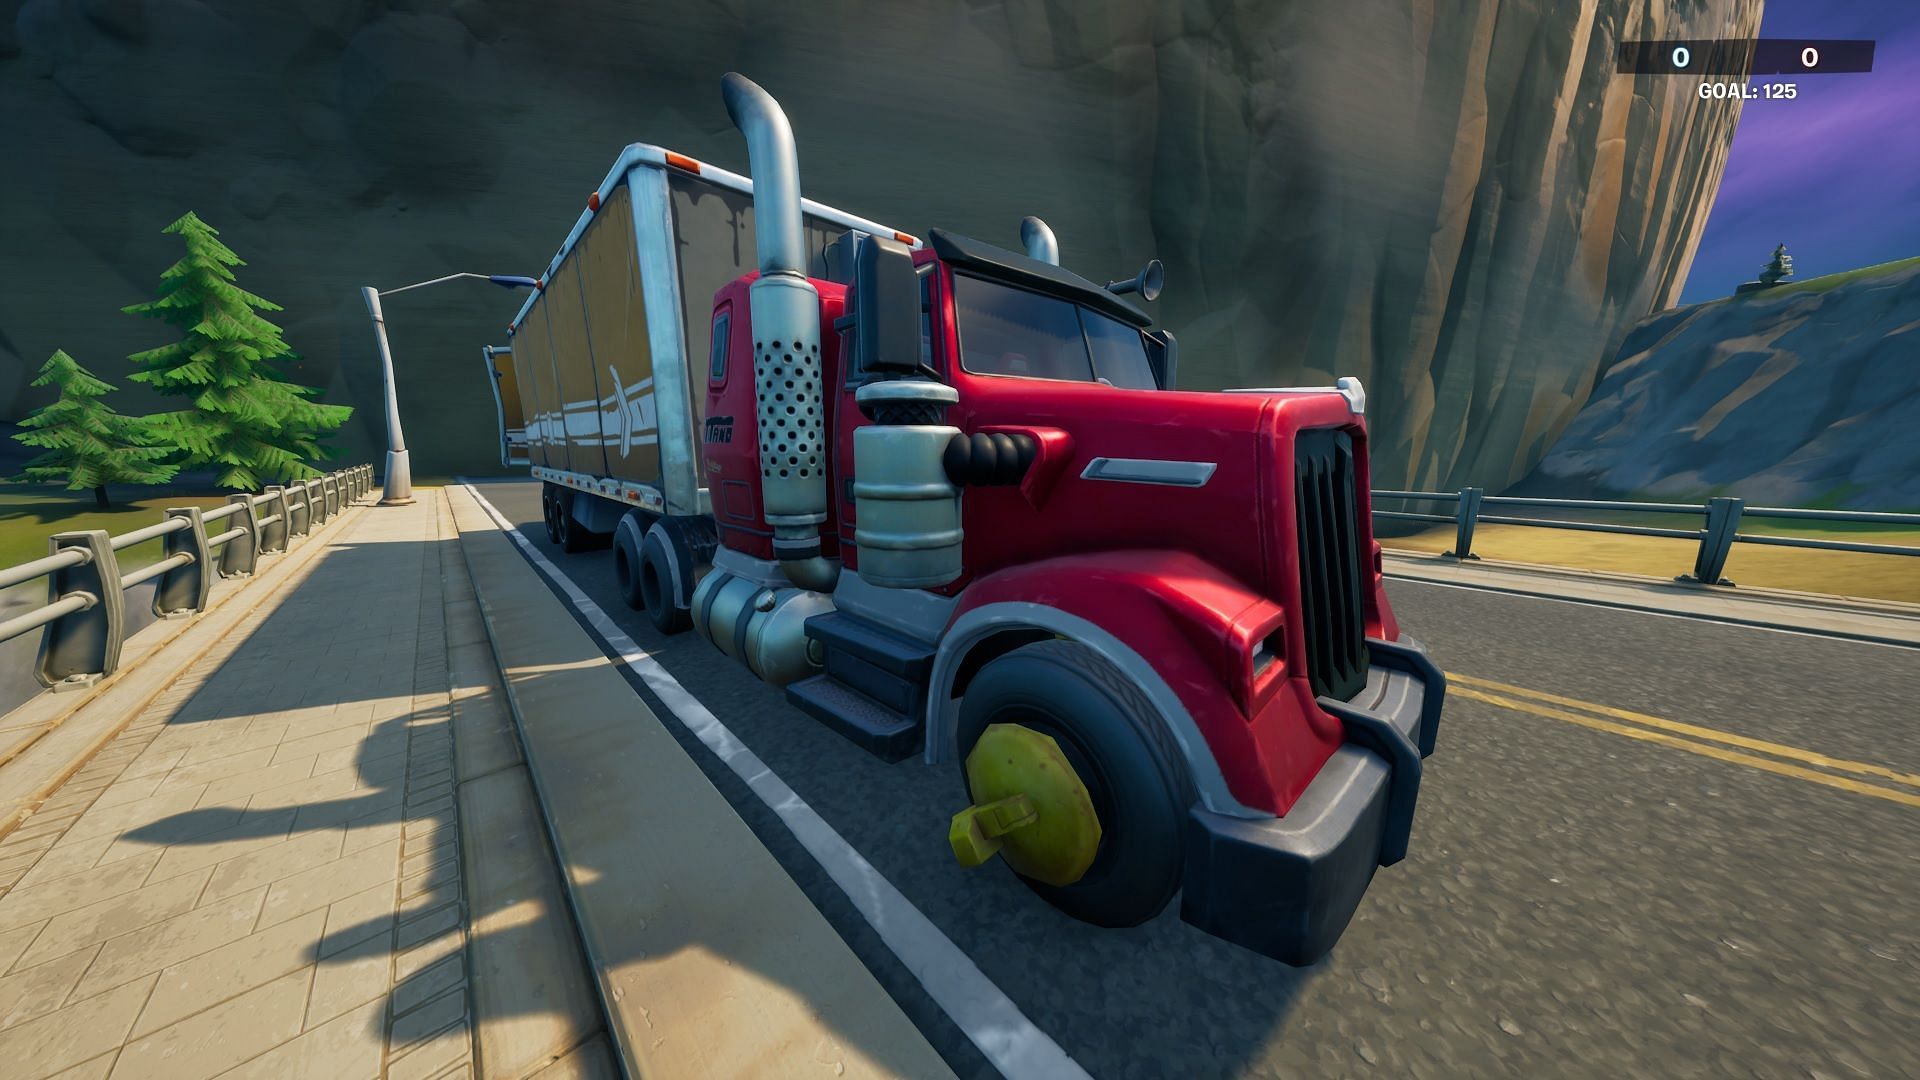 Fortnite has vehicles on every corner now, including semi trucks. (Image via Epic Games)